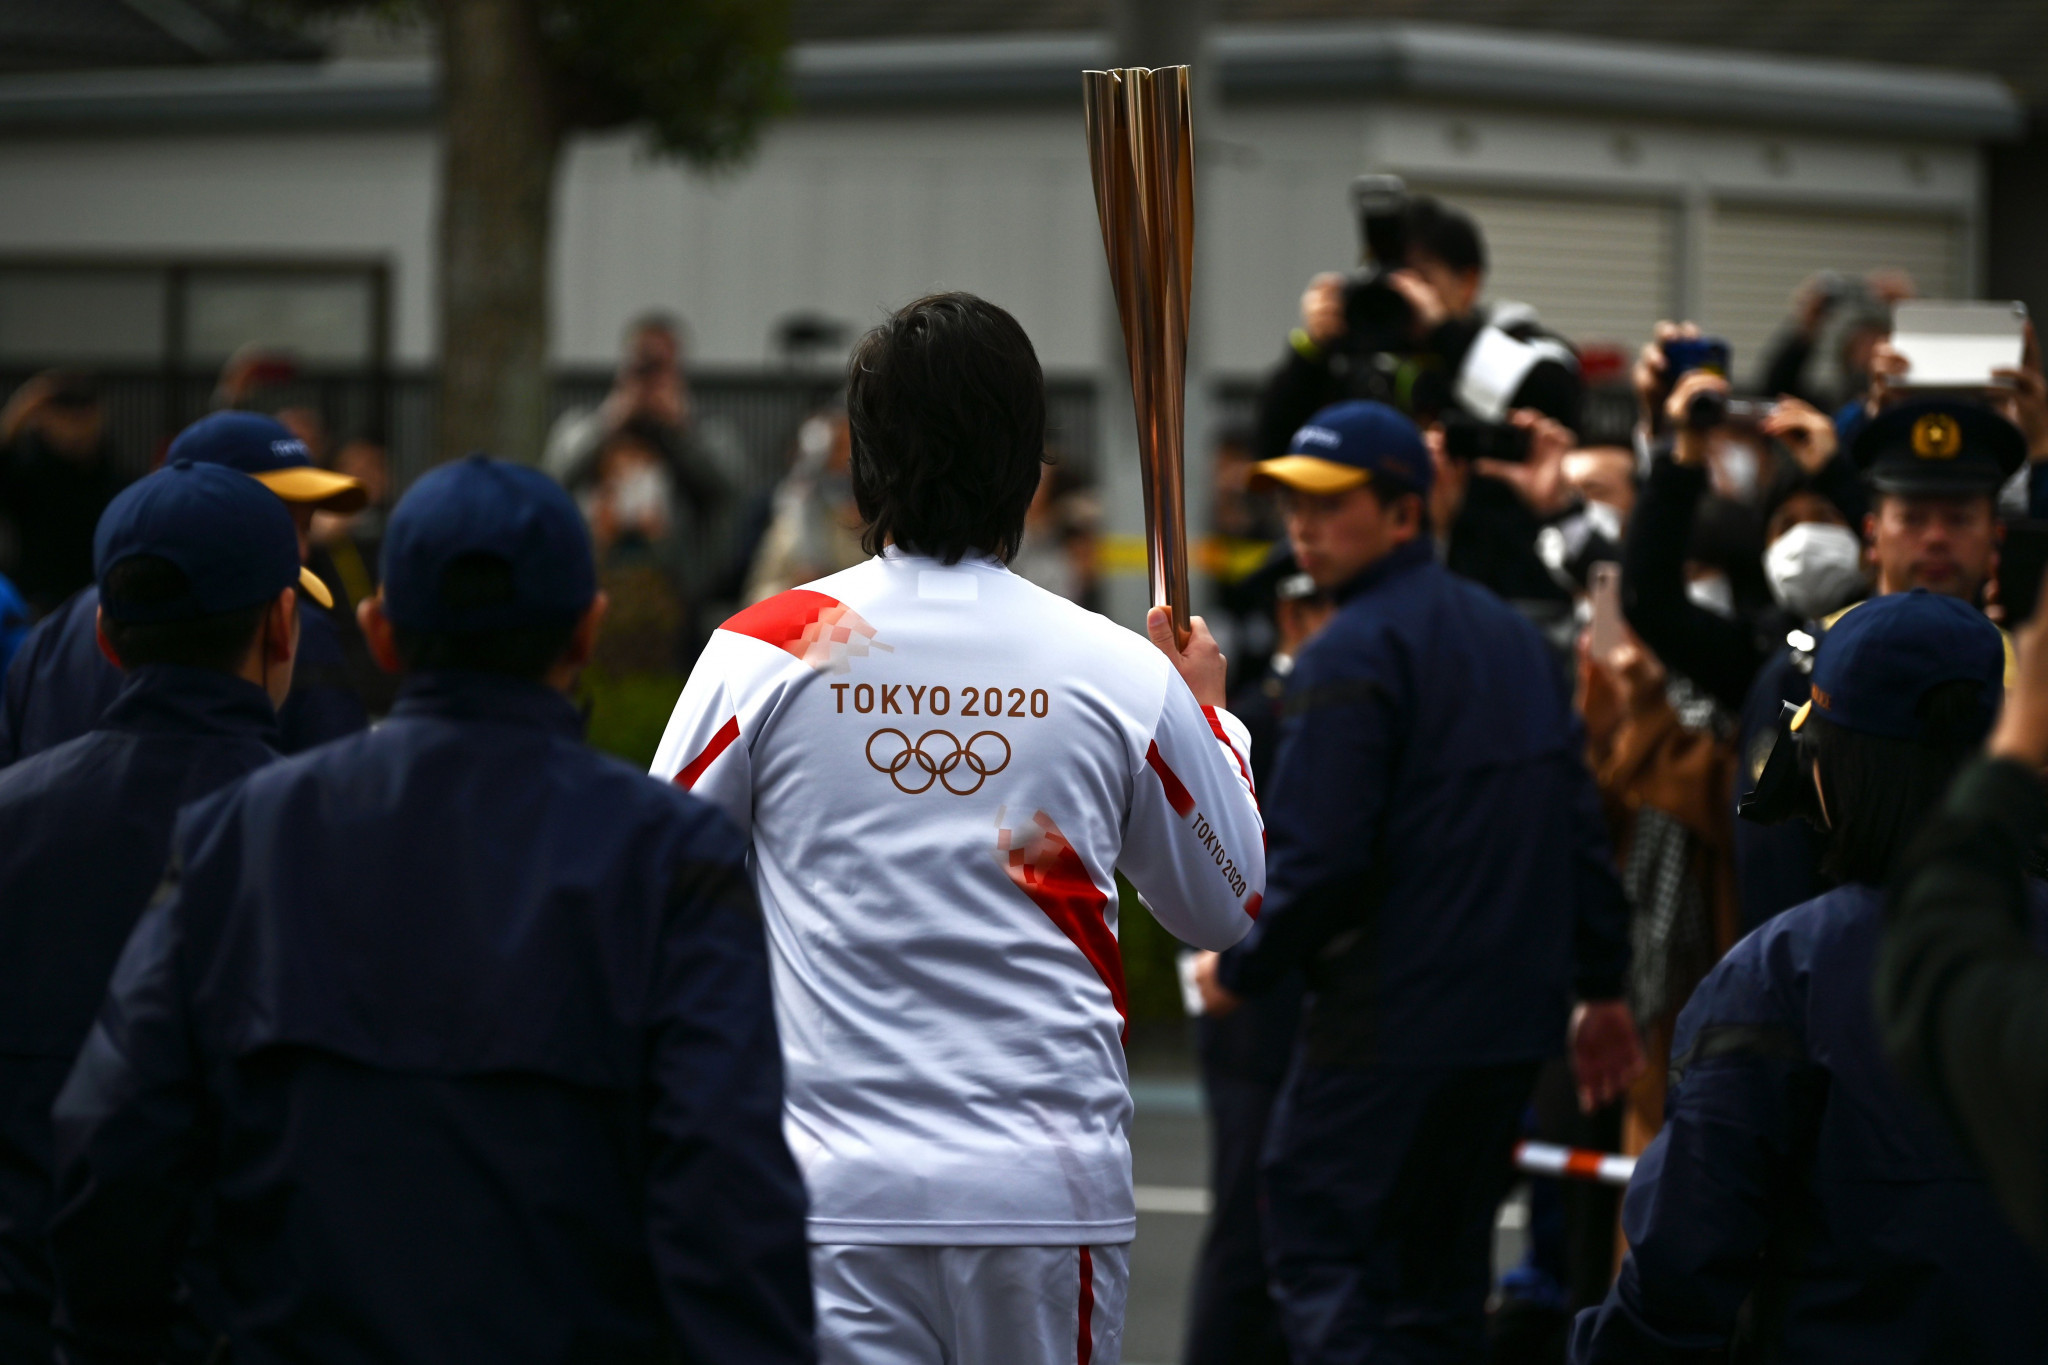 A rehearsal for the Olympic Torch Relay was held last week ©Getty Images